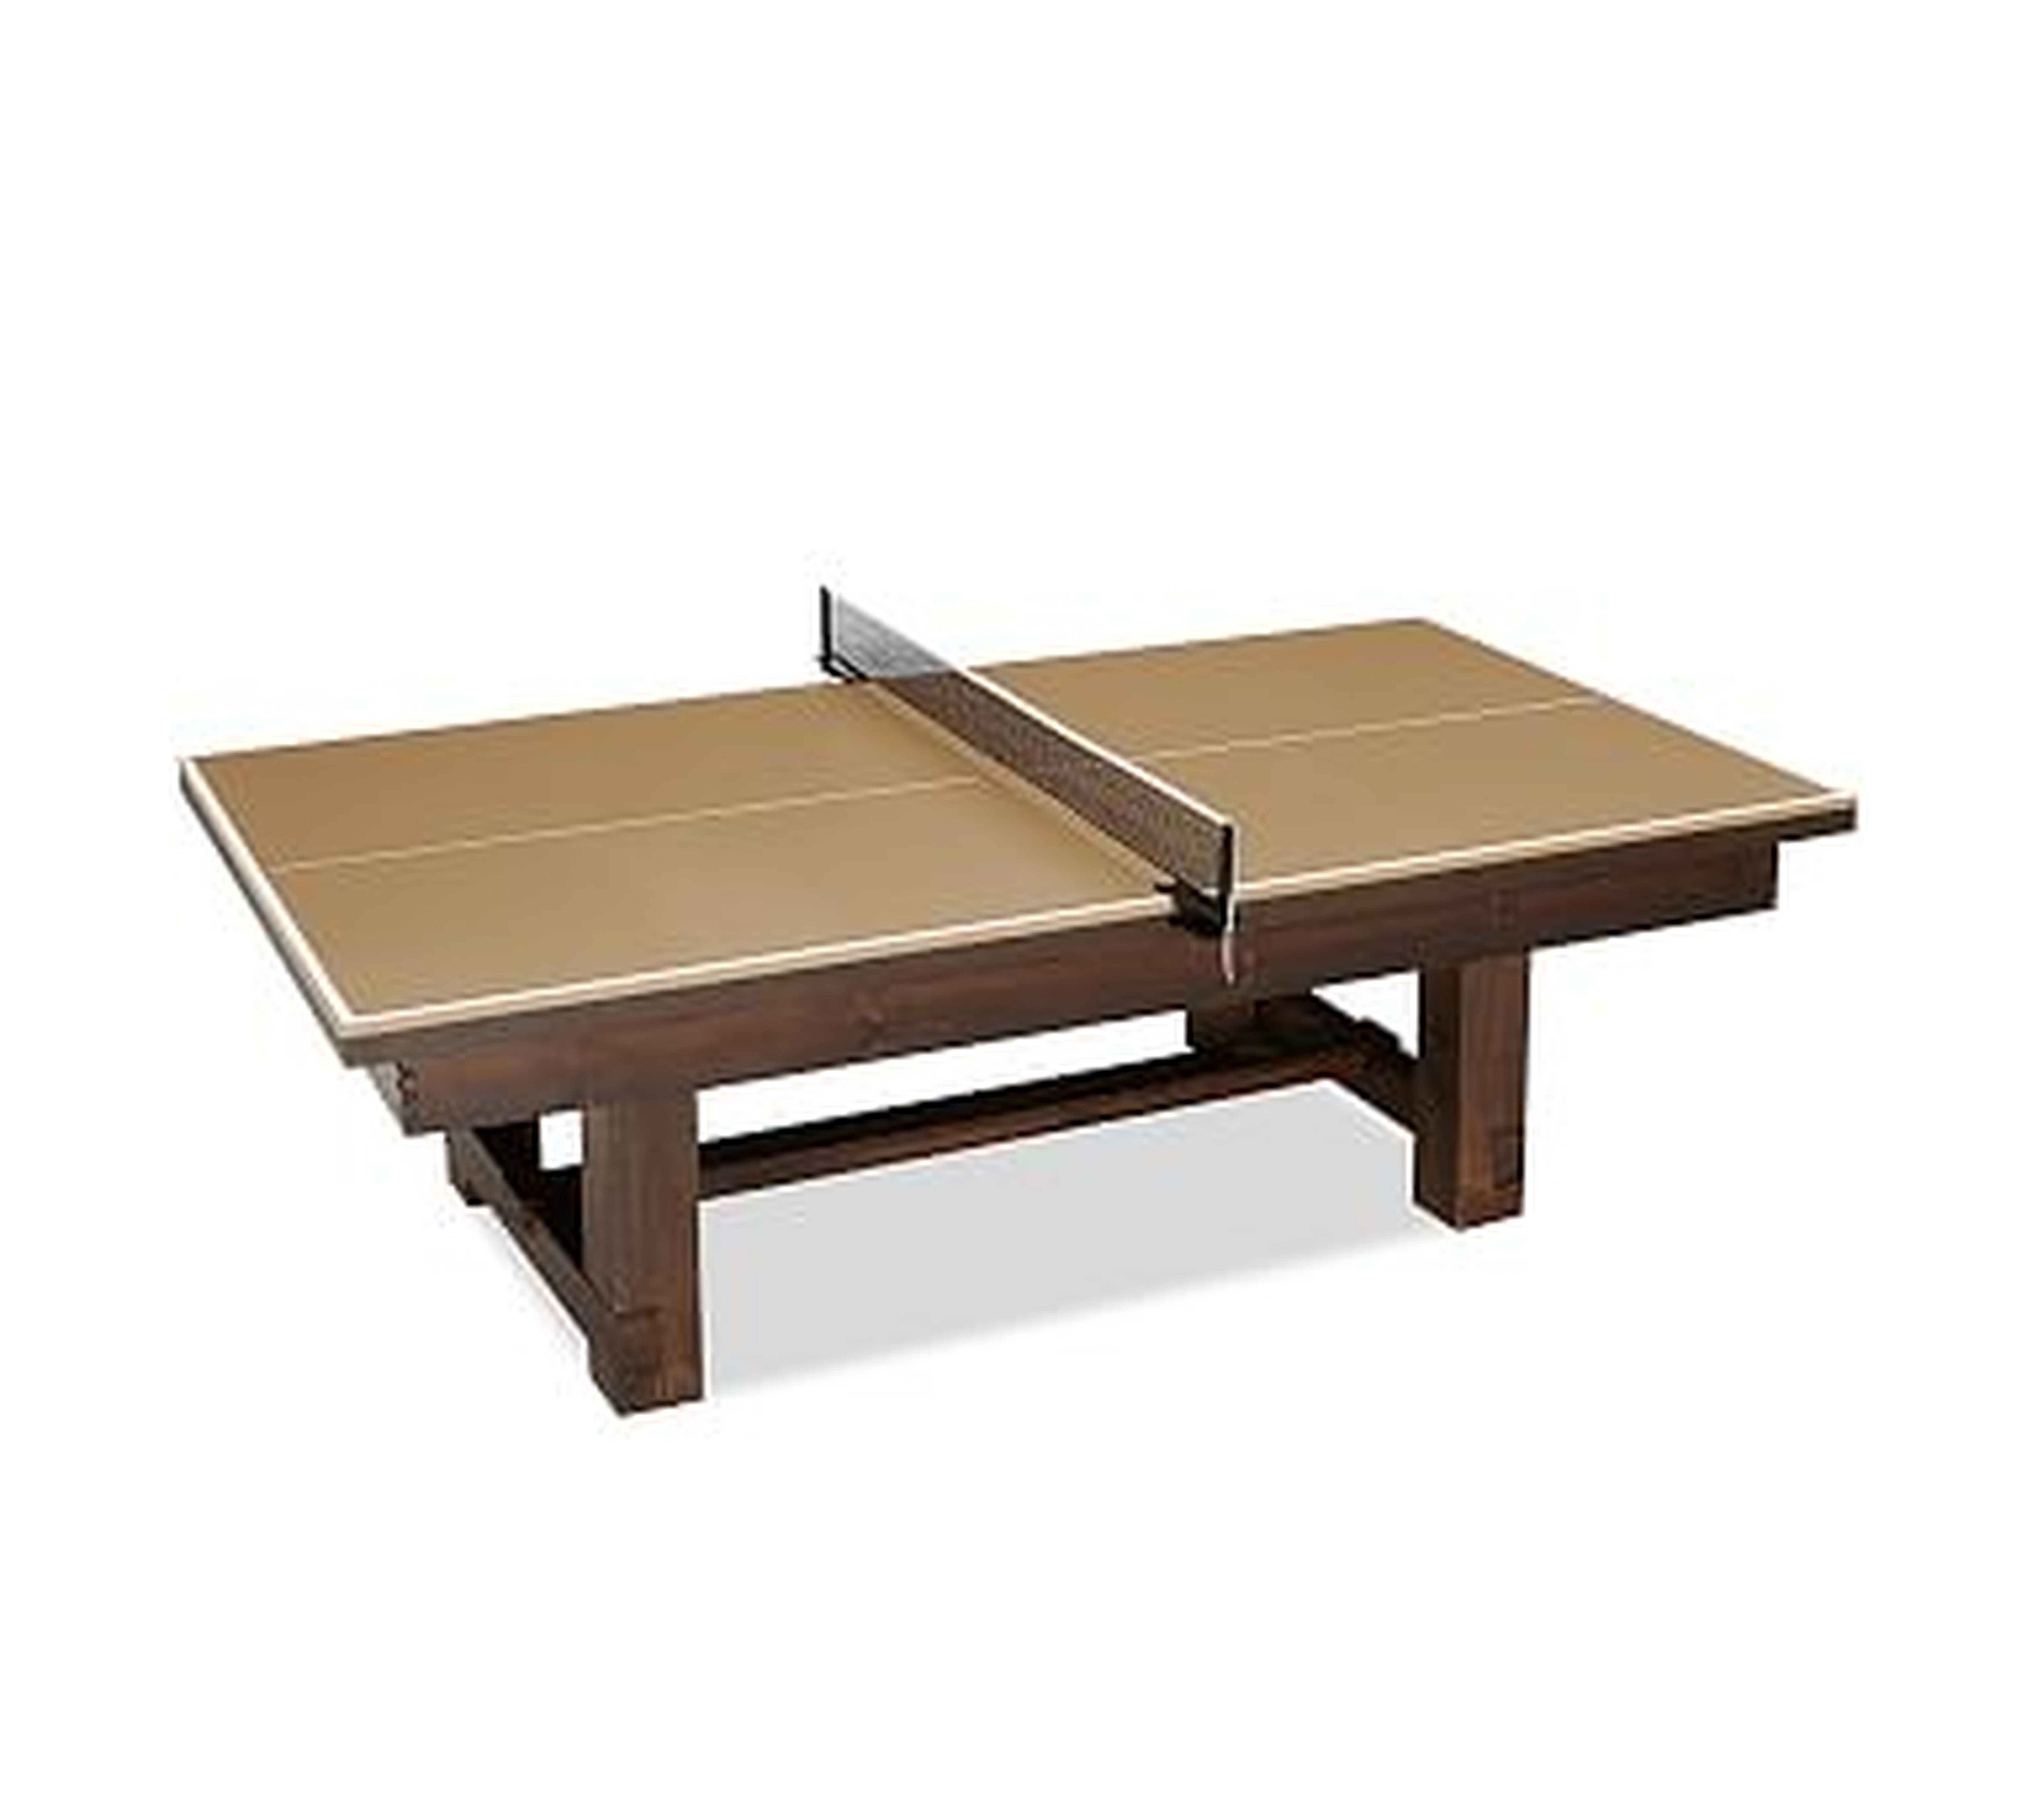 PB Pool Table Table Tennis Conversion Cover, Camel - Pottery Barn